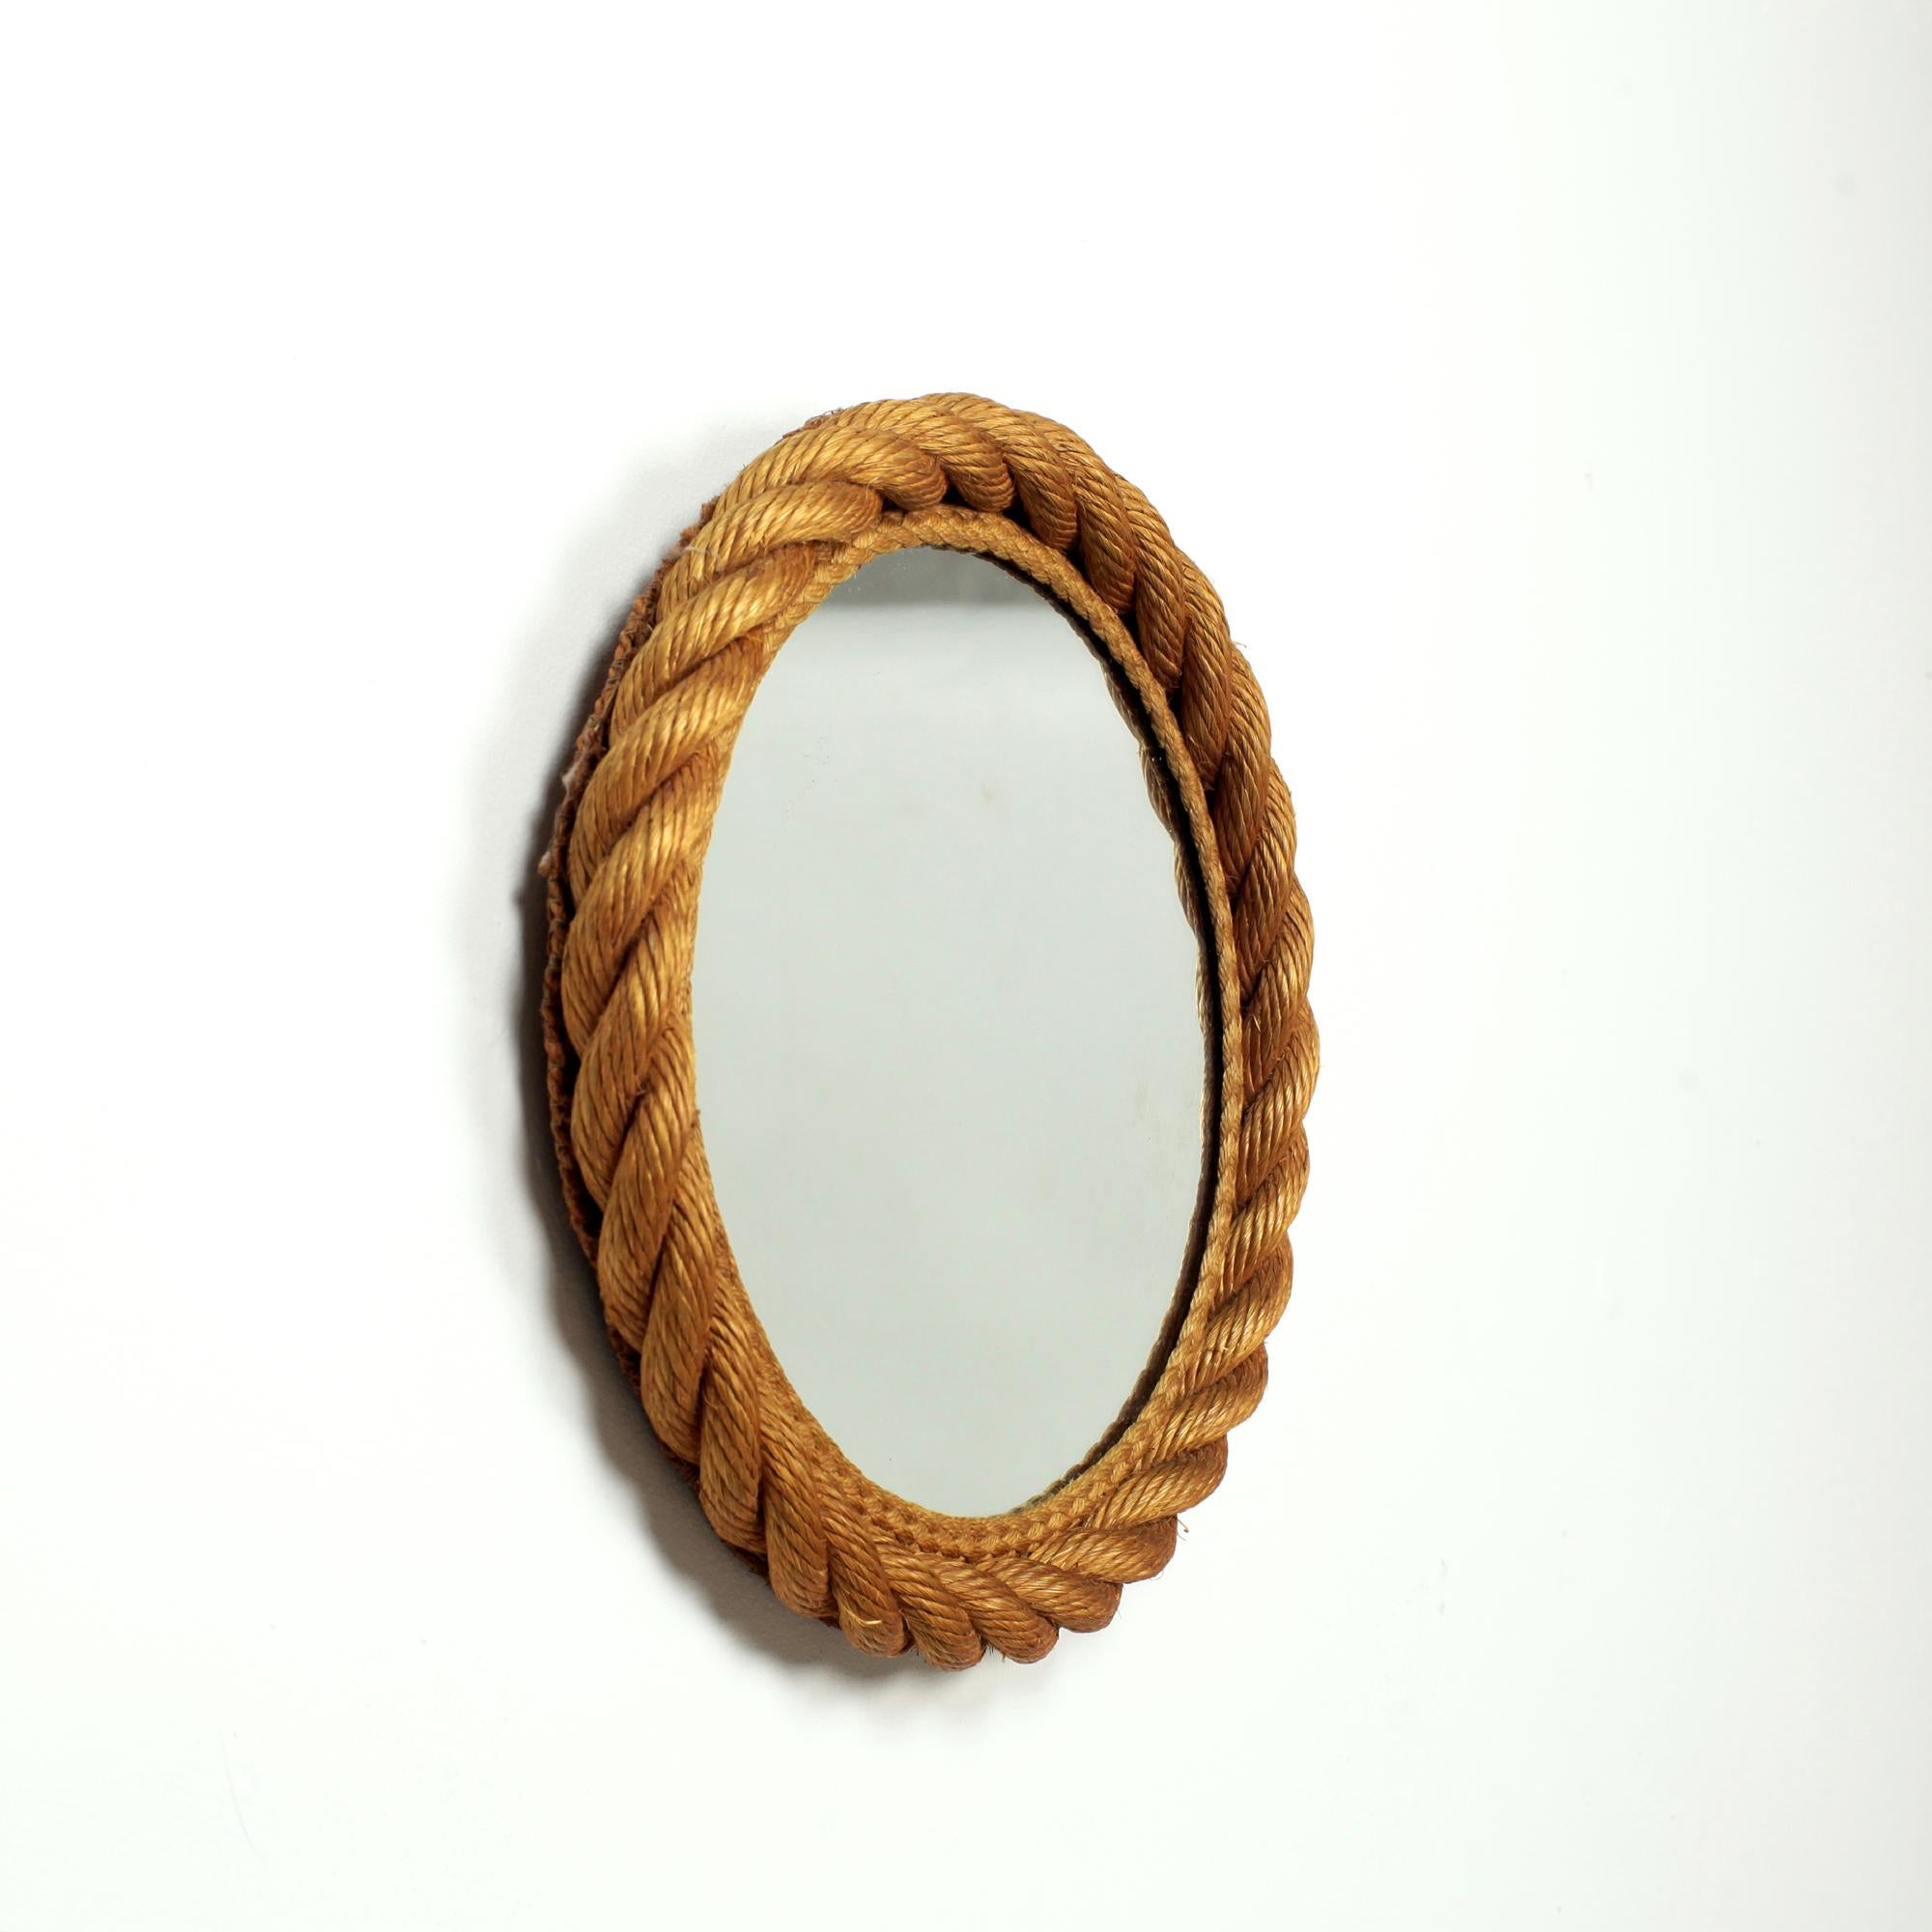 Audoux-Minet Midcentury Rope Wall Mirror France 1960's For Sale 1